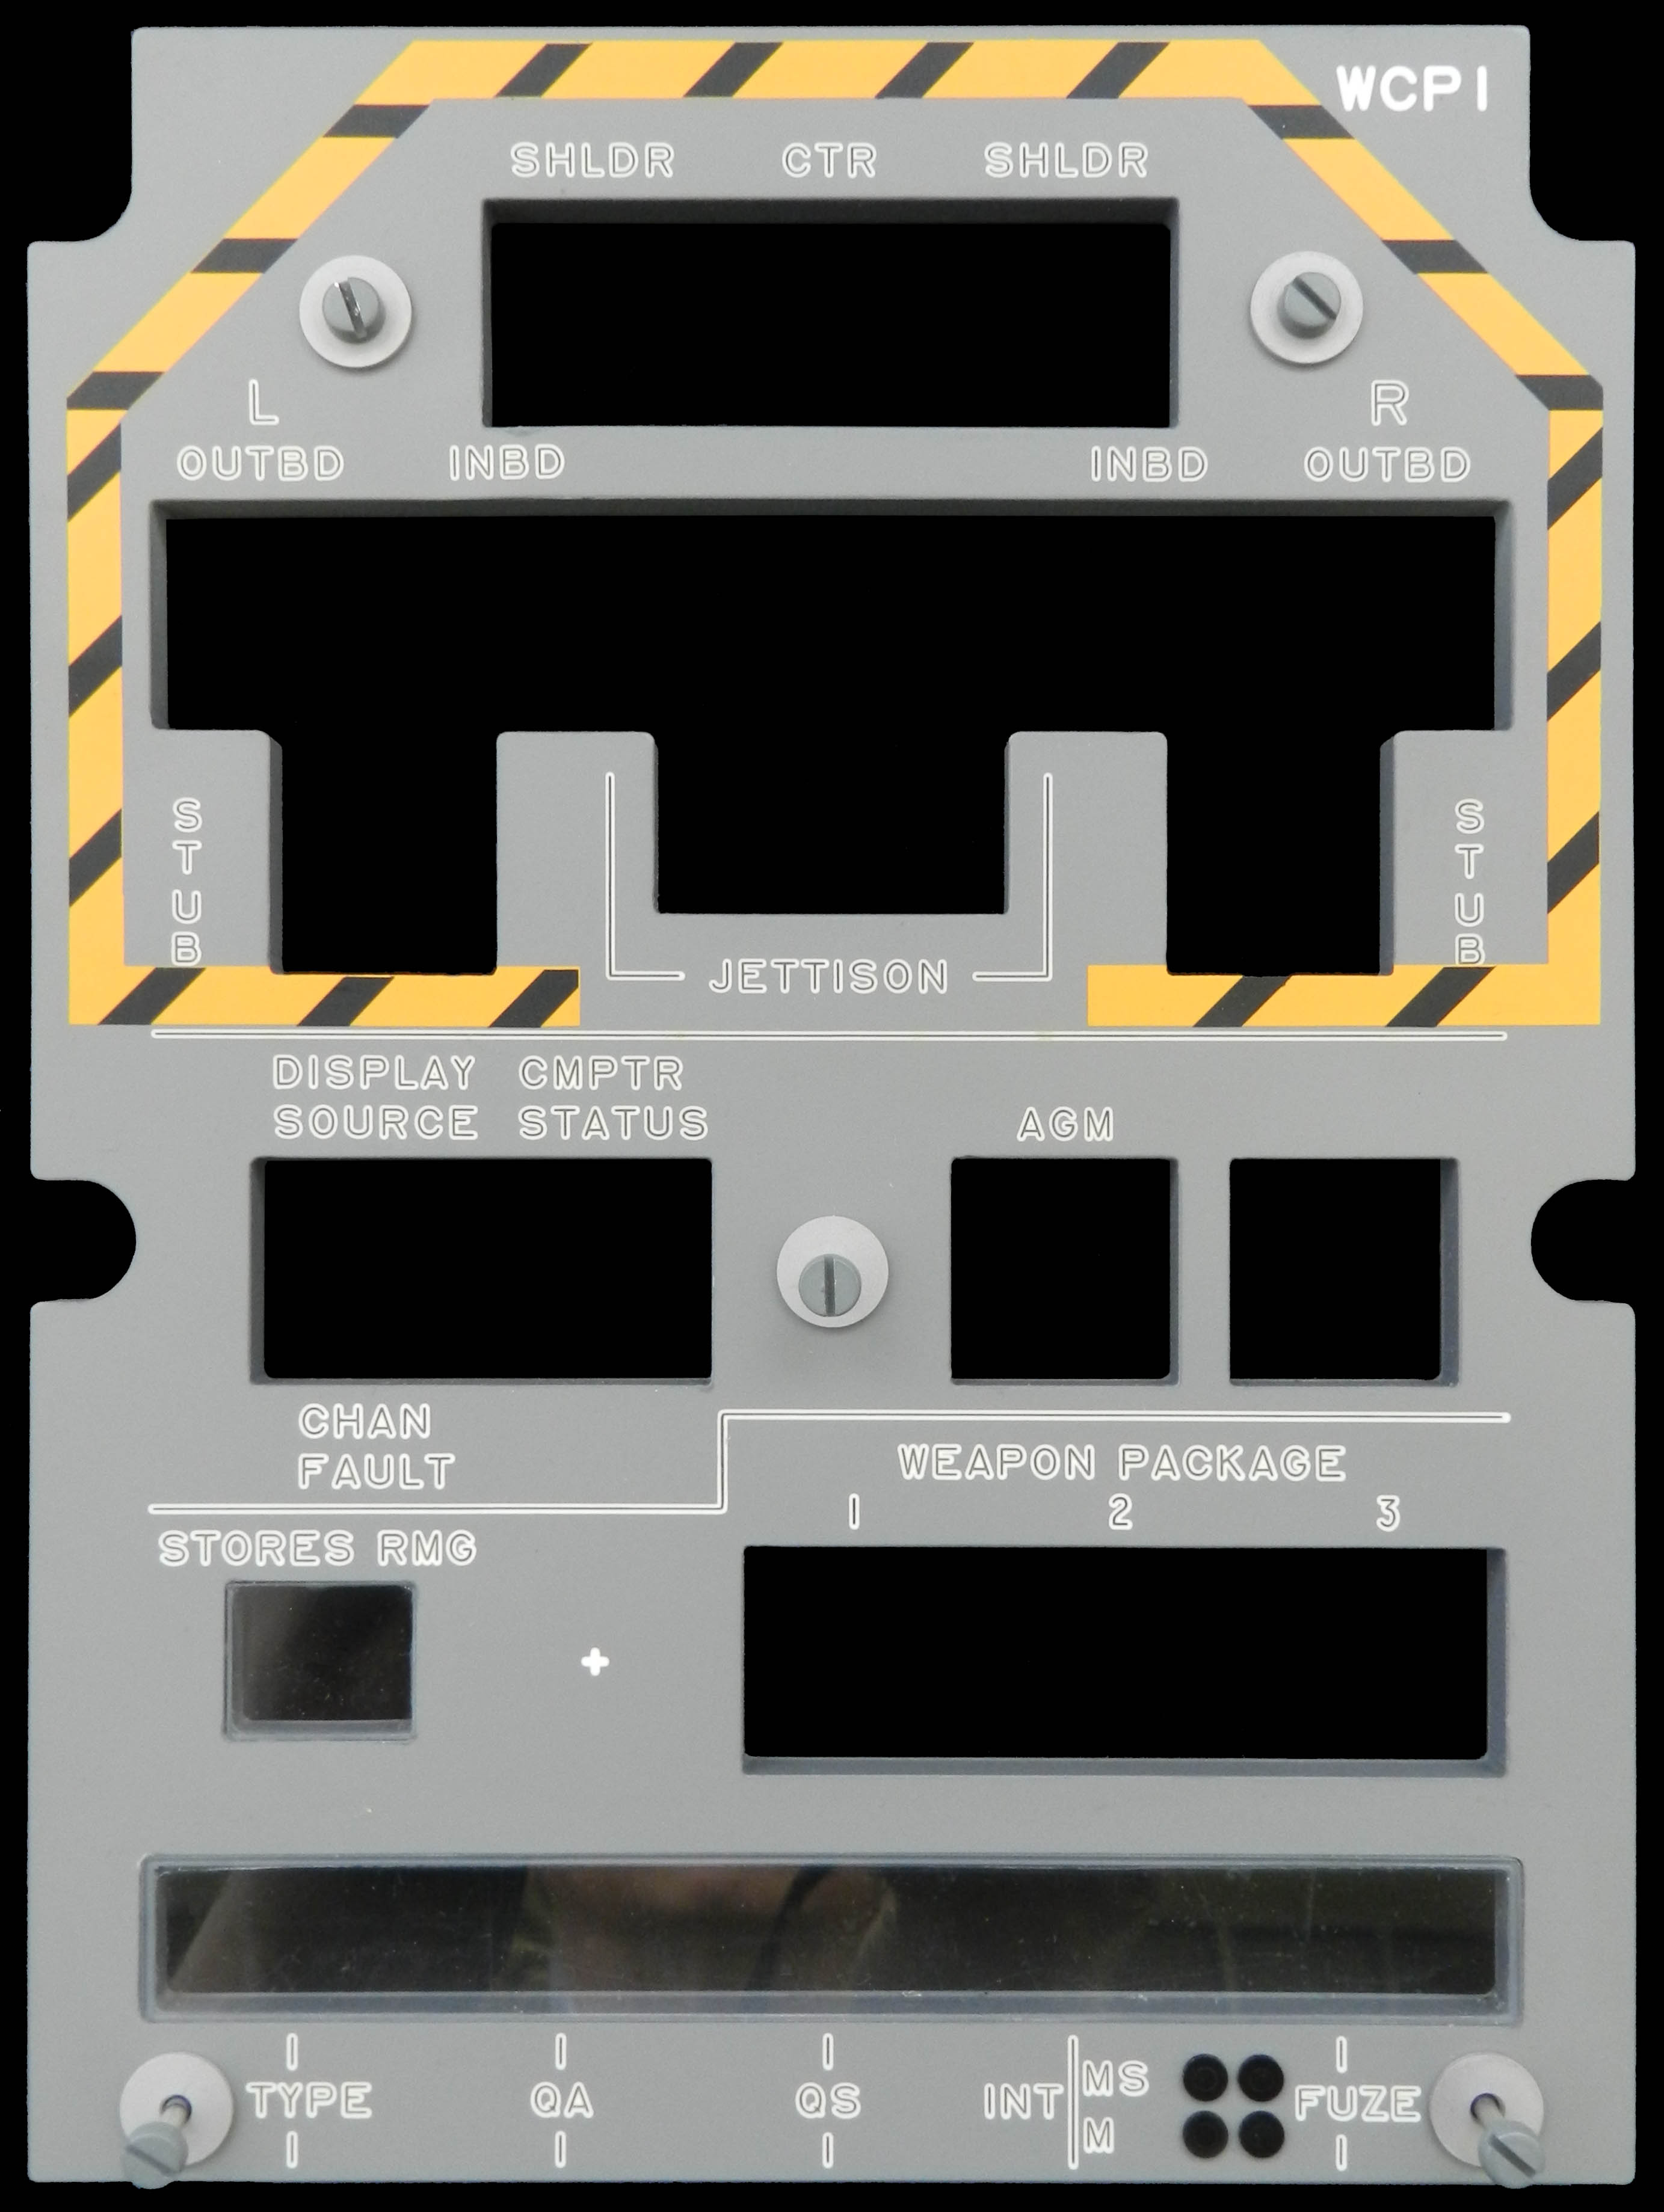 Front Panel Bezel for Weapons Control Panel 1 